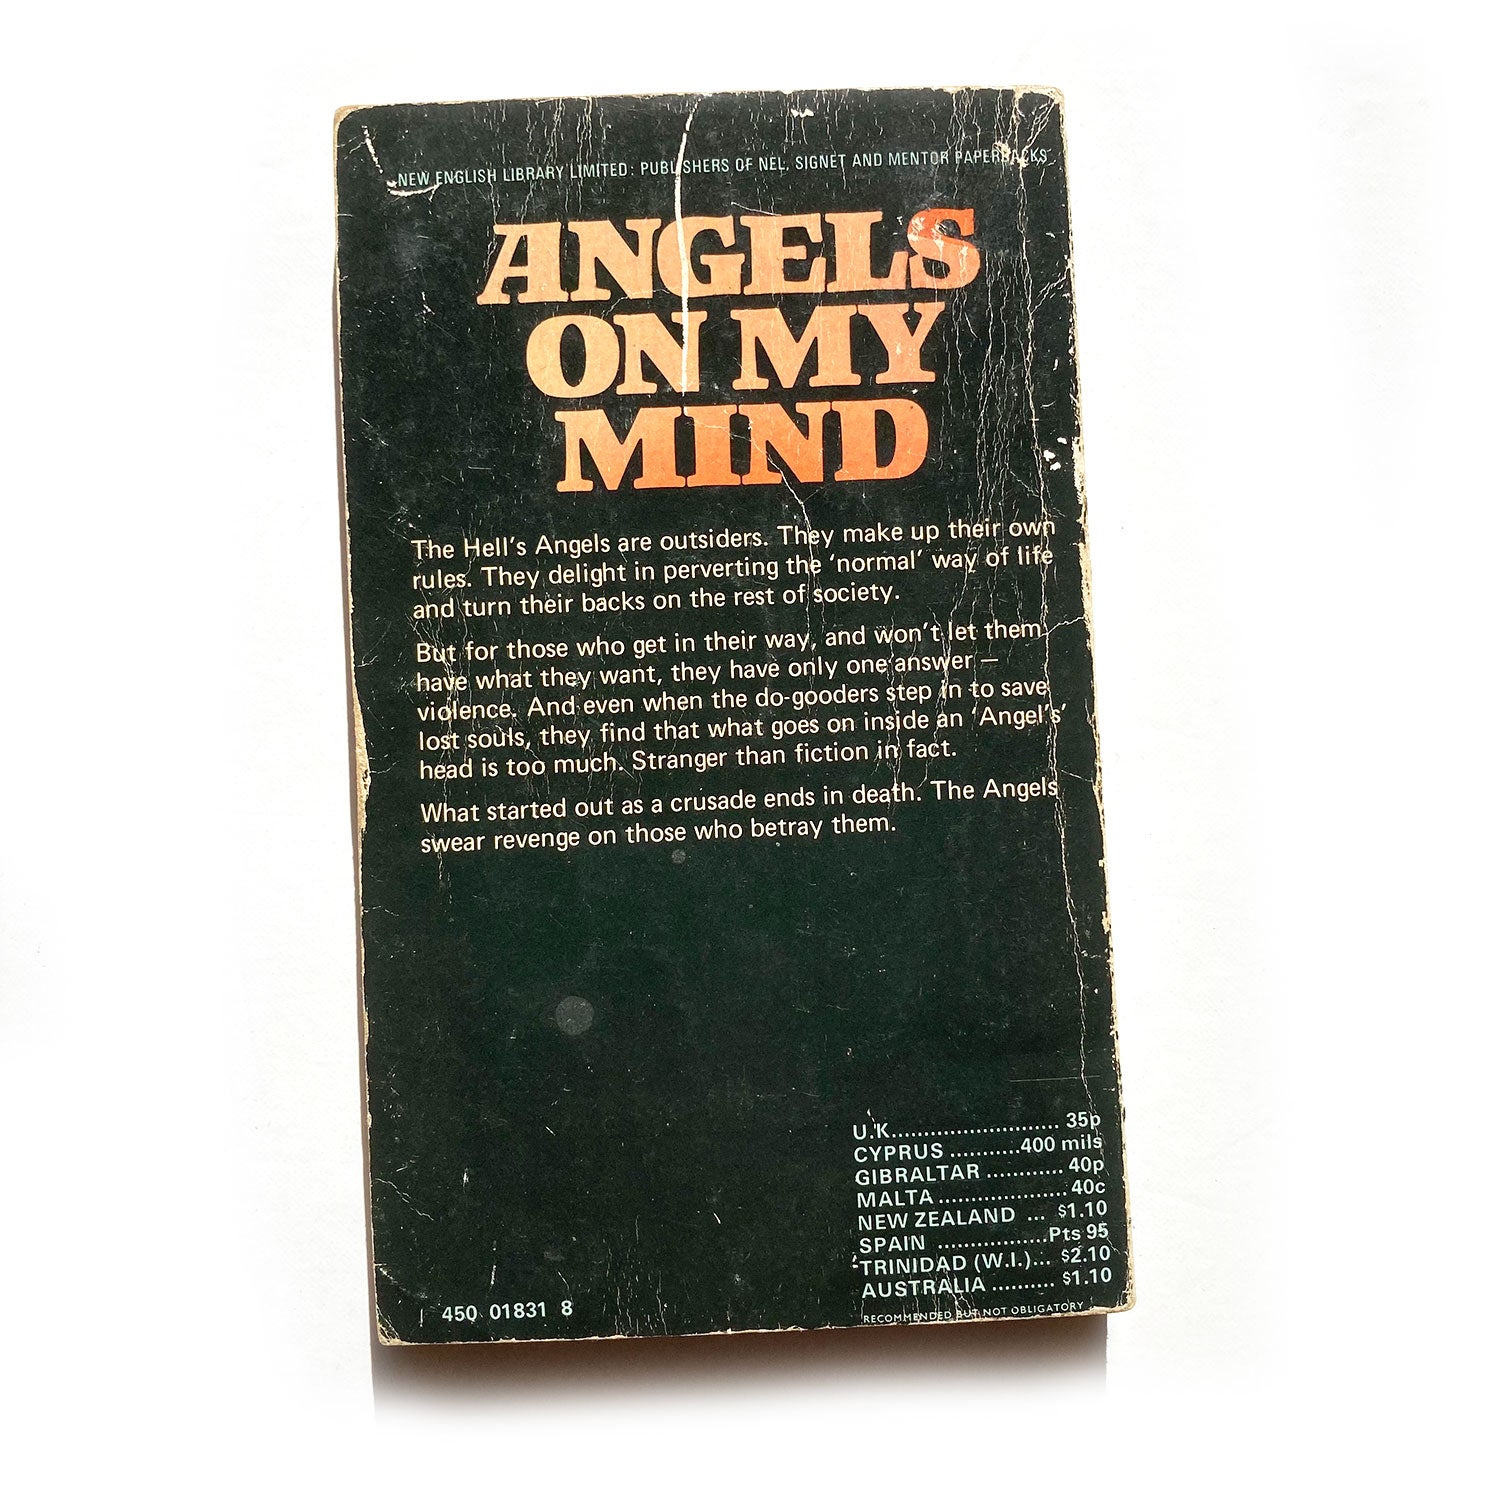 Angels on my Mind by Mick Norman, New English Library paperback, 1975